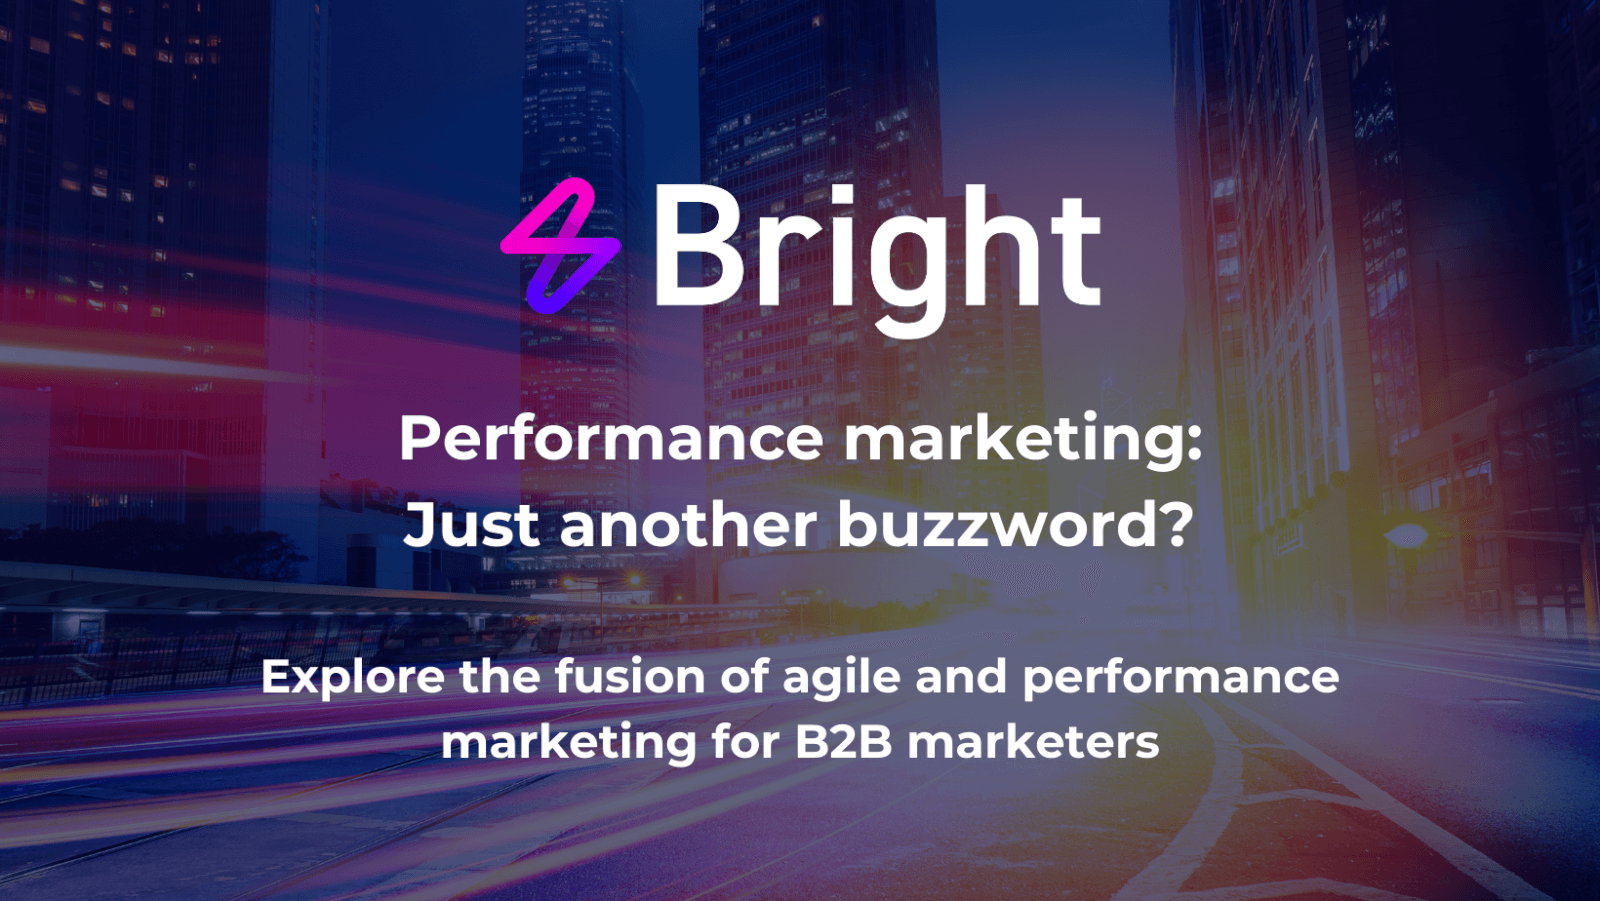 Performance marketing: Just another buzzword?